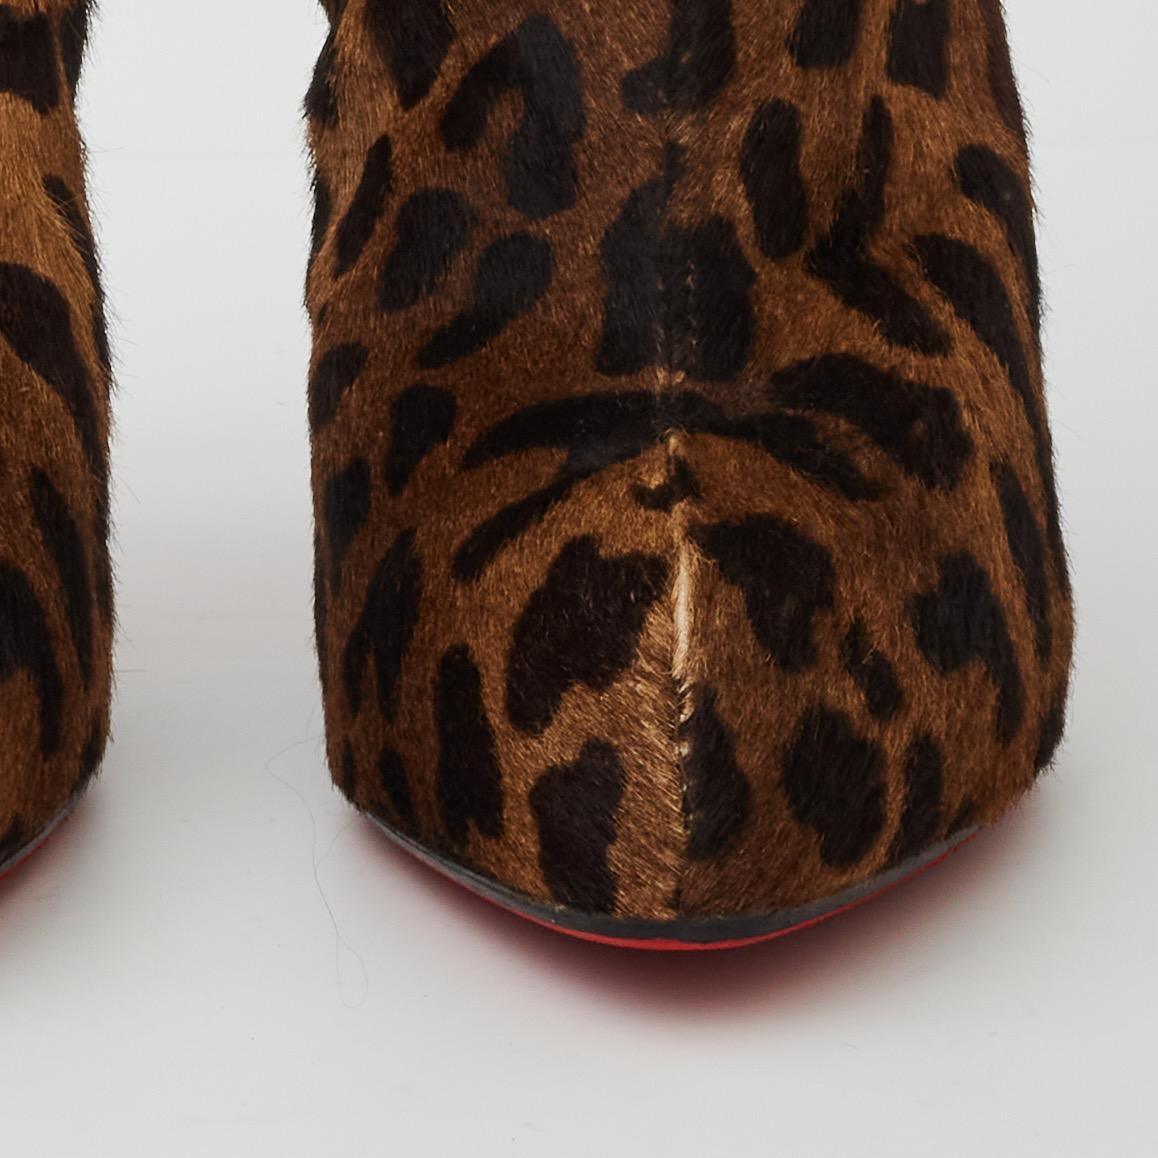 Christian Louboutin Ponyhair Animal Print Boots (37 EU) In Good Condition For Sale In Montreal, Quebec